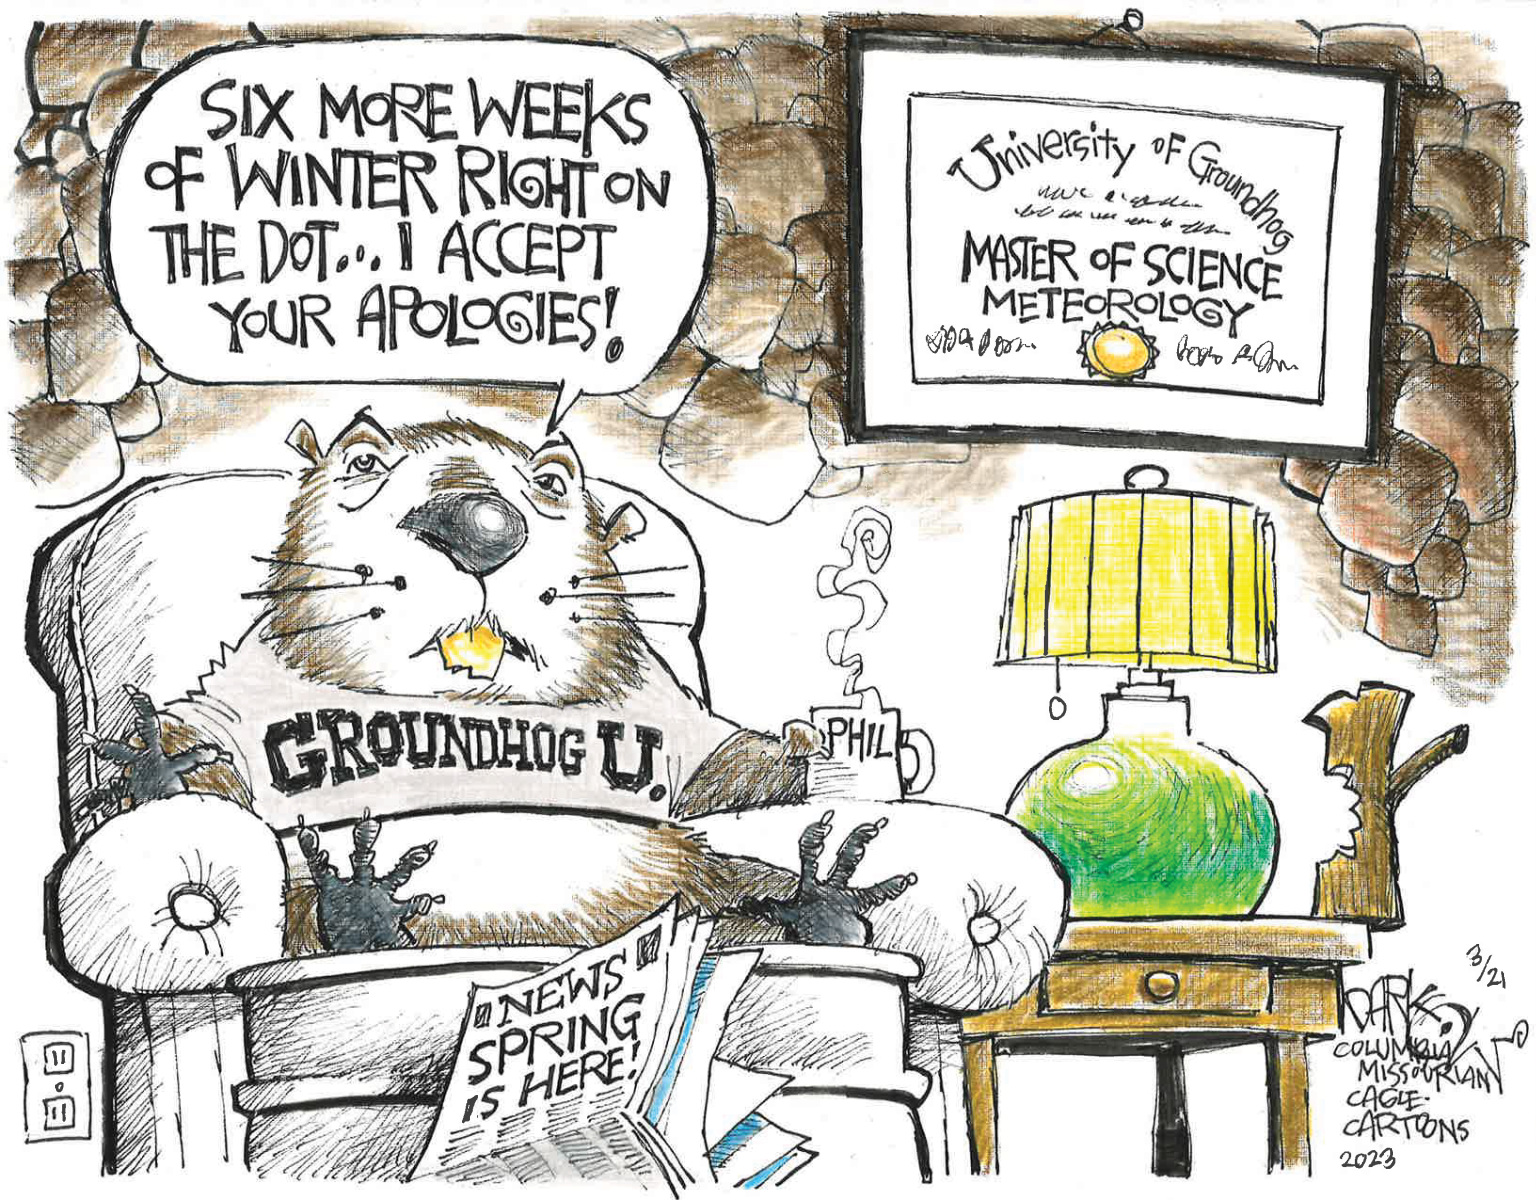 The Groundhog Was Right - By John Darkow